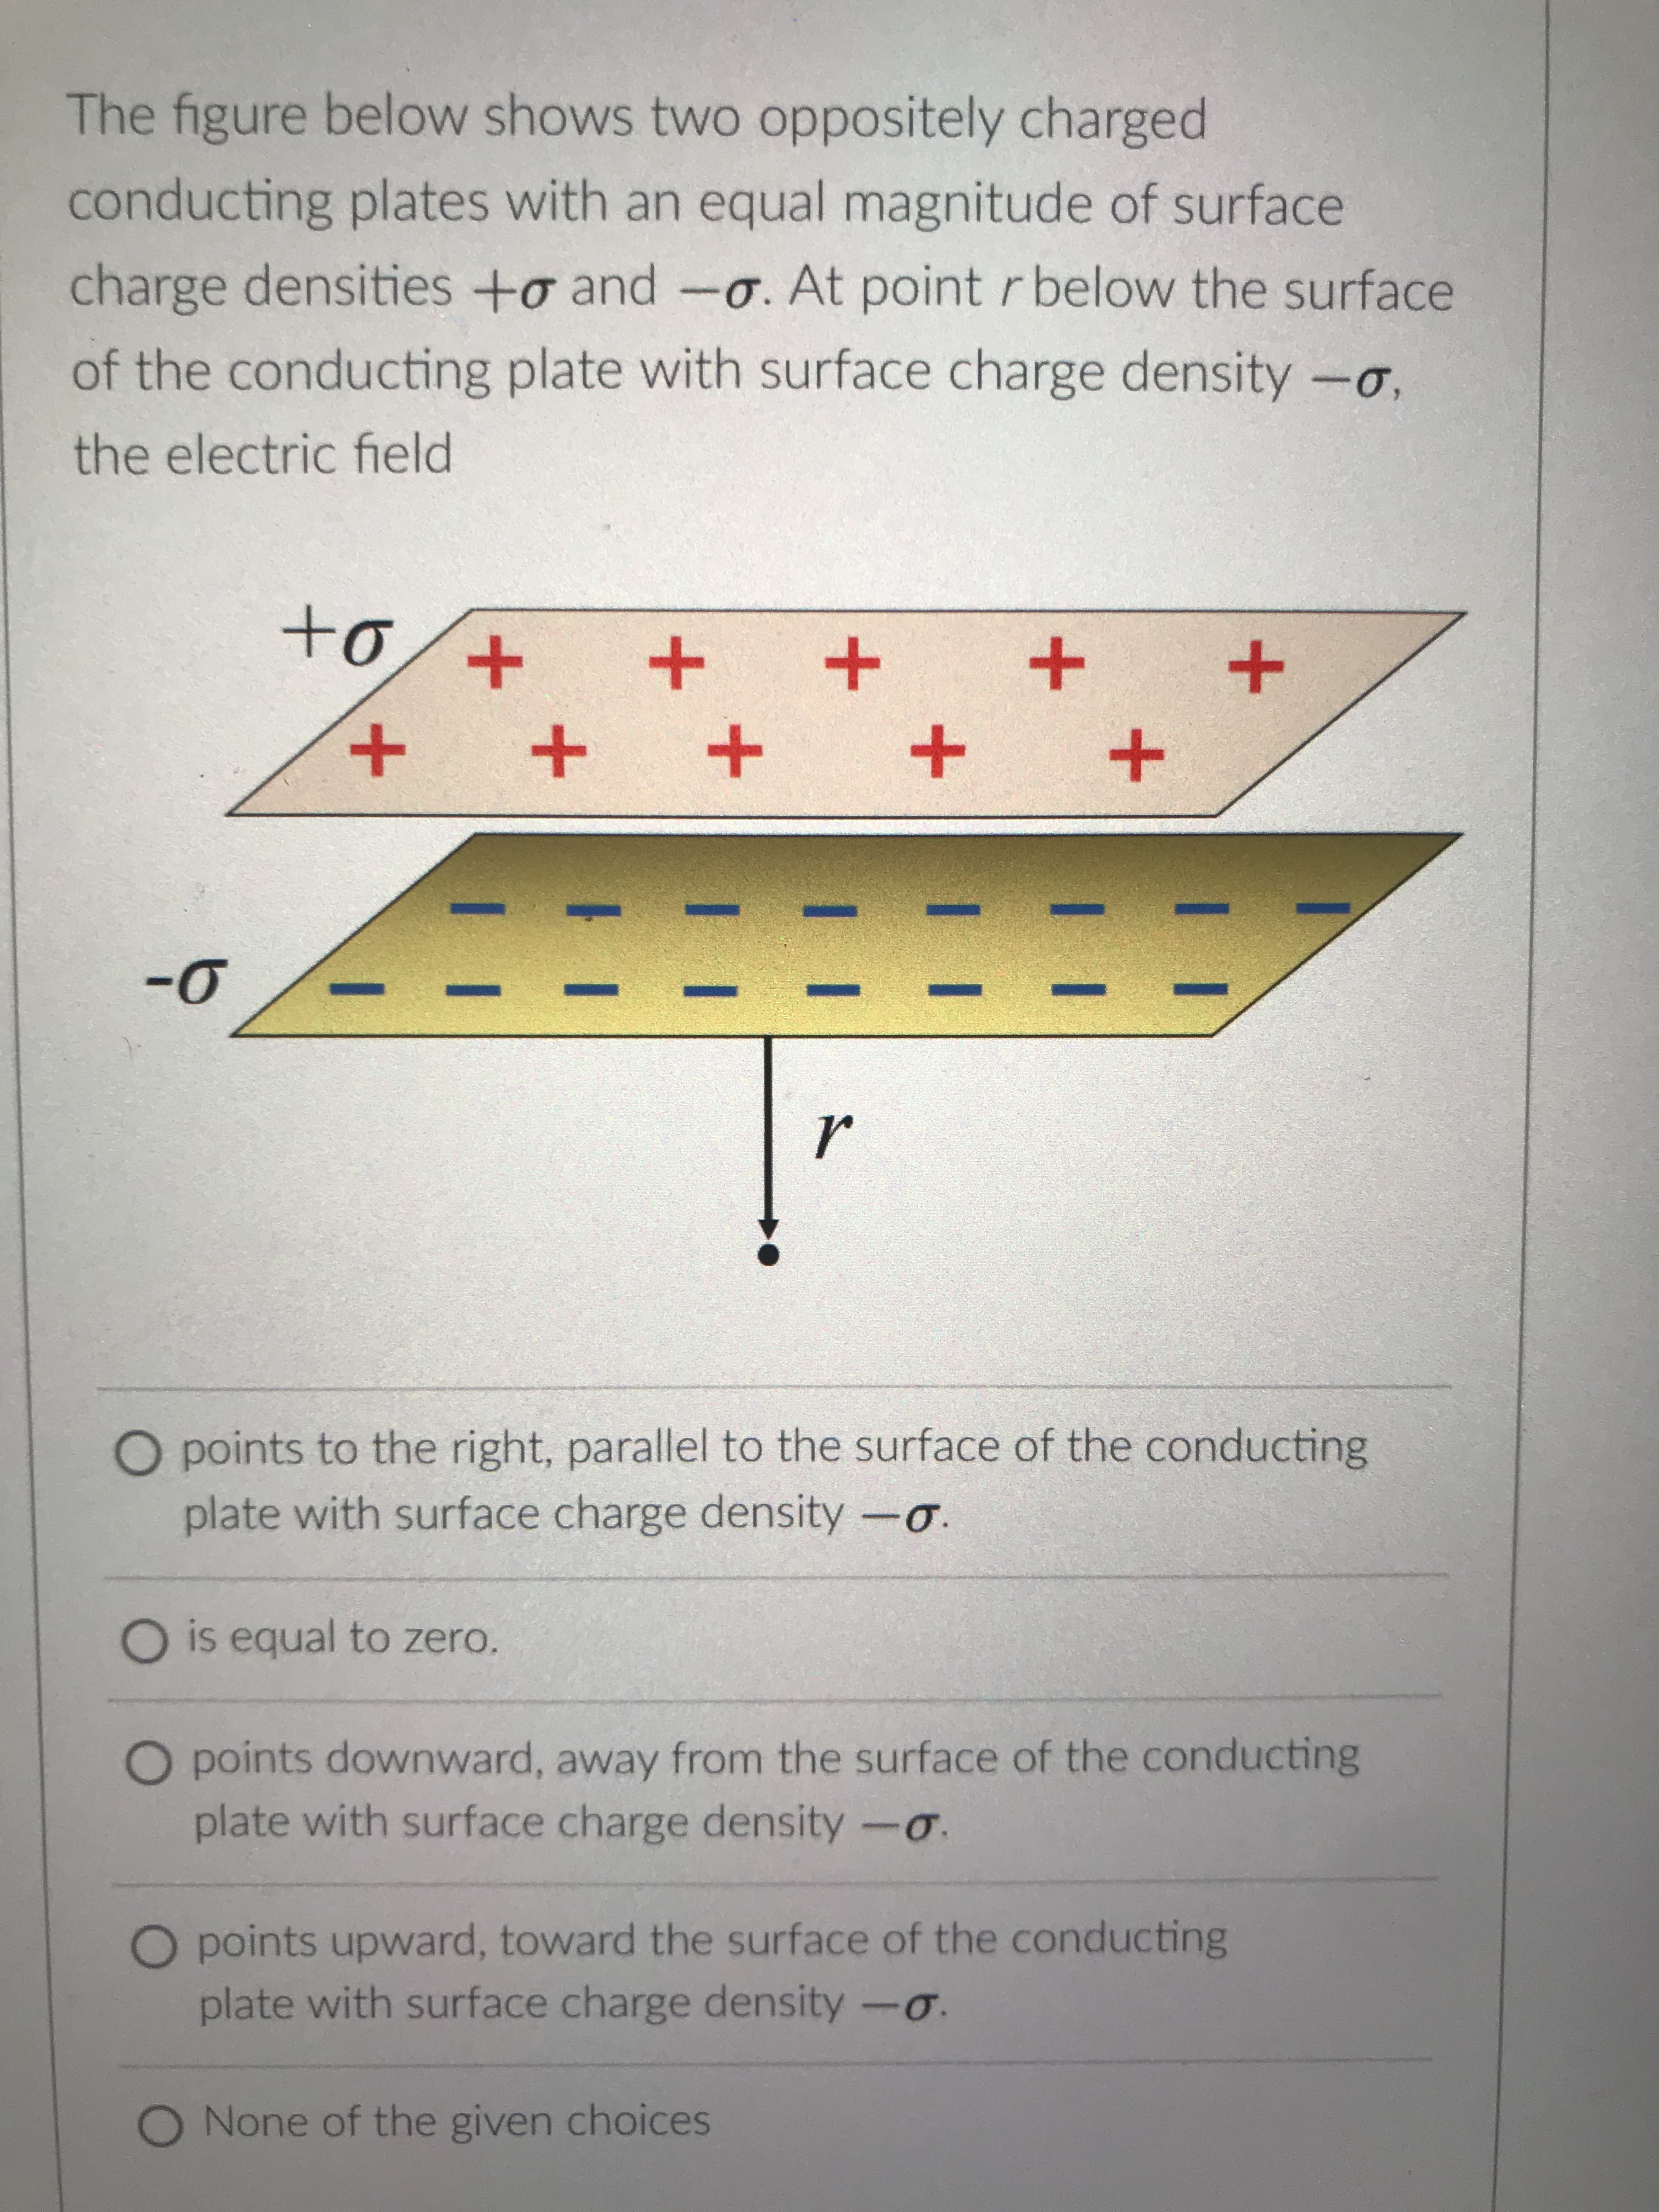 +
11
+
The figure below shows two oppositely charged
conducting plates with an equal magnitude of surface
charge densities +o and -0. At point r below the surface
of the conducting plate with surface charge density -o,
the electric field
+o.
+
+
O points to the right, parallel to the surface of the conducting
plate with surface charge density -o.
O is equal to zero.
O points downward, away from the surface of the conducting
plate with surface charge density-o.
points upward, toward the surface of the conducting
plate with surface charge density -o.
O None of the given choices
